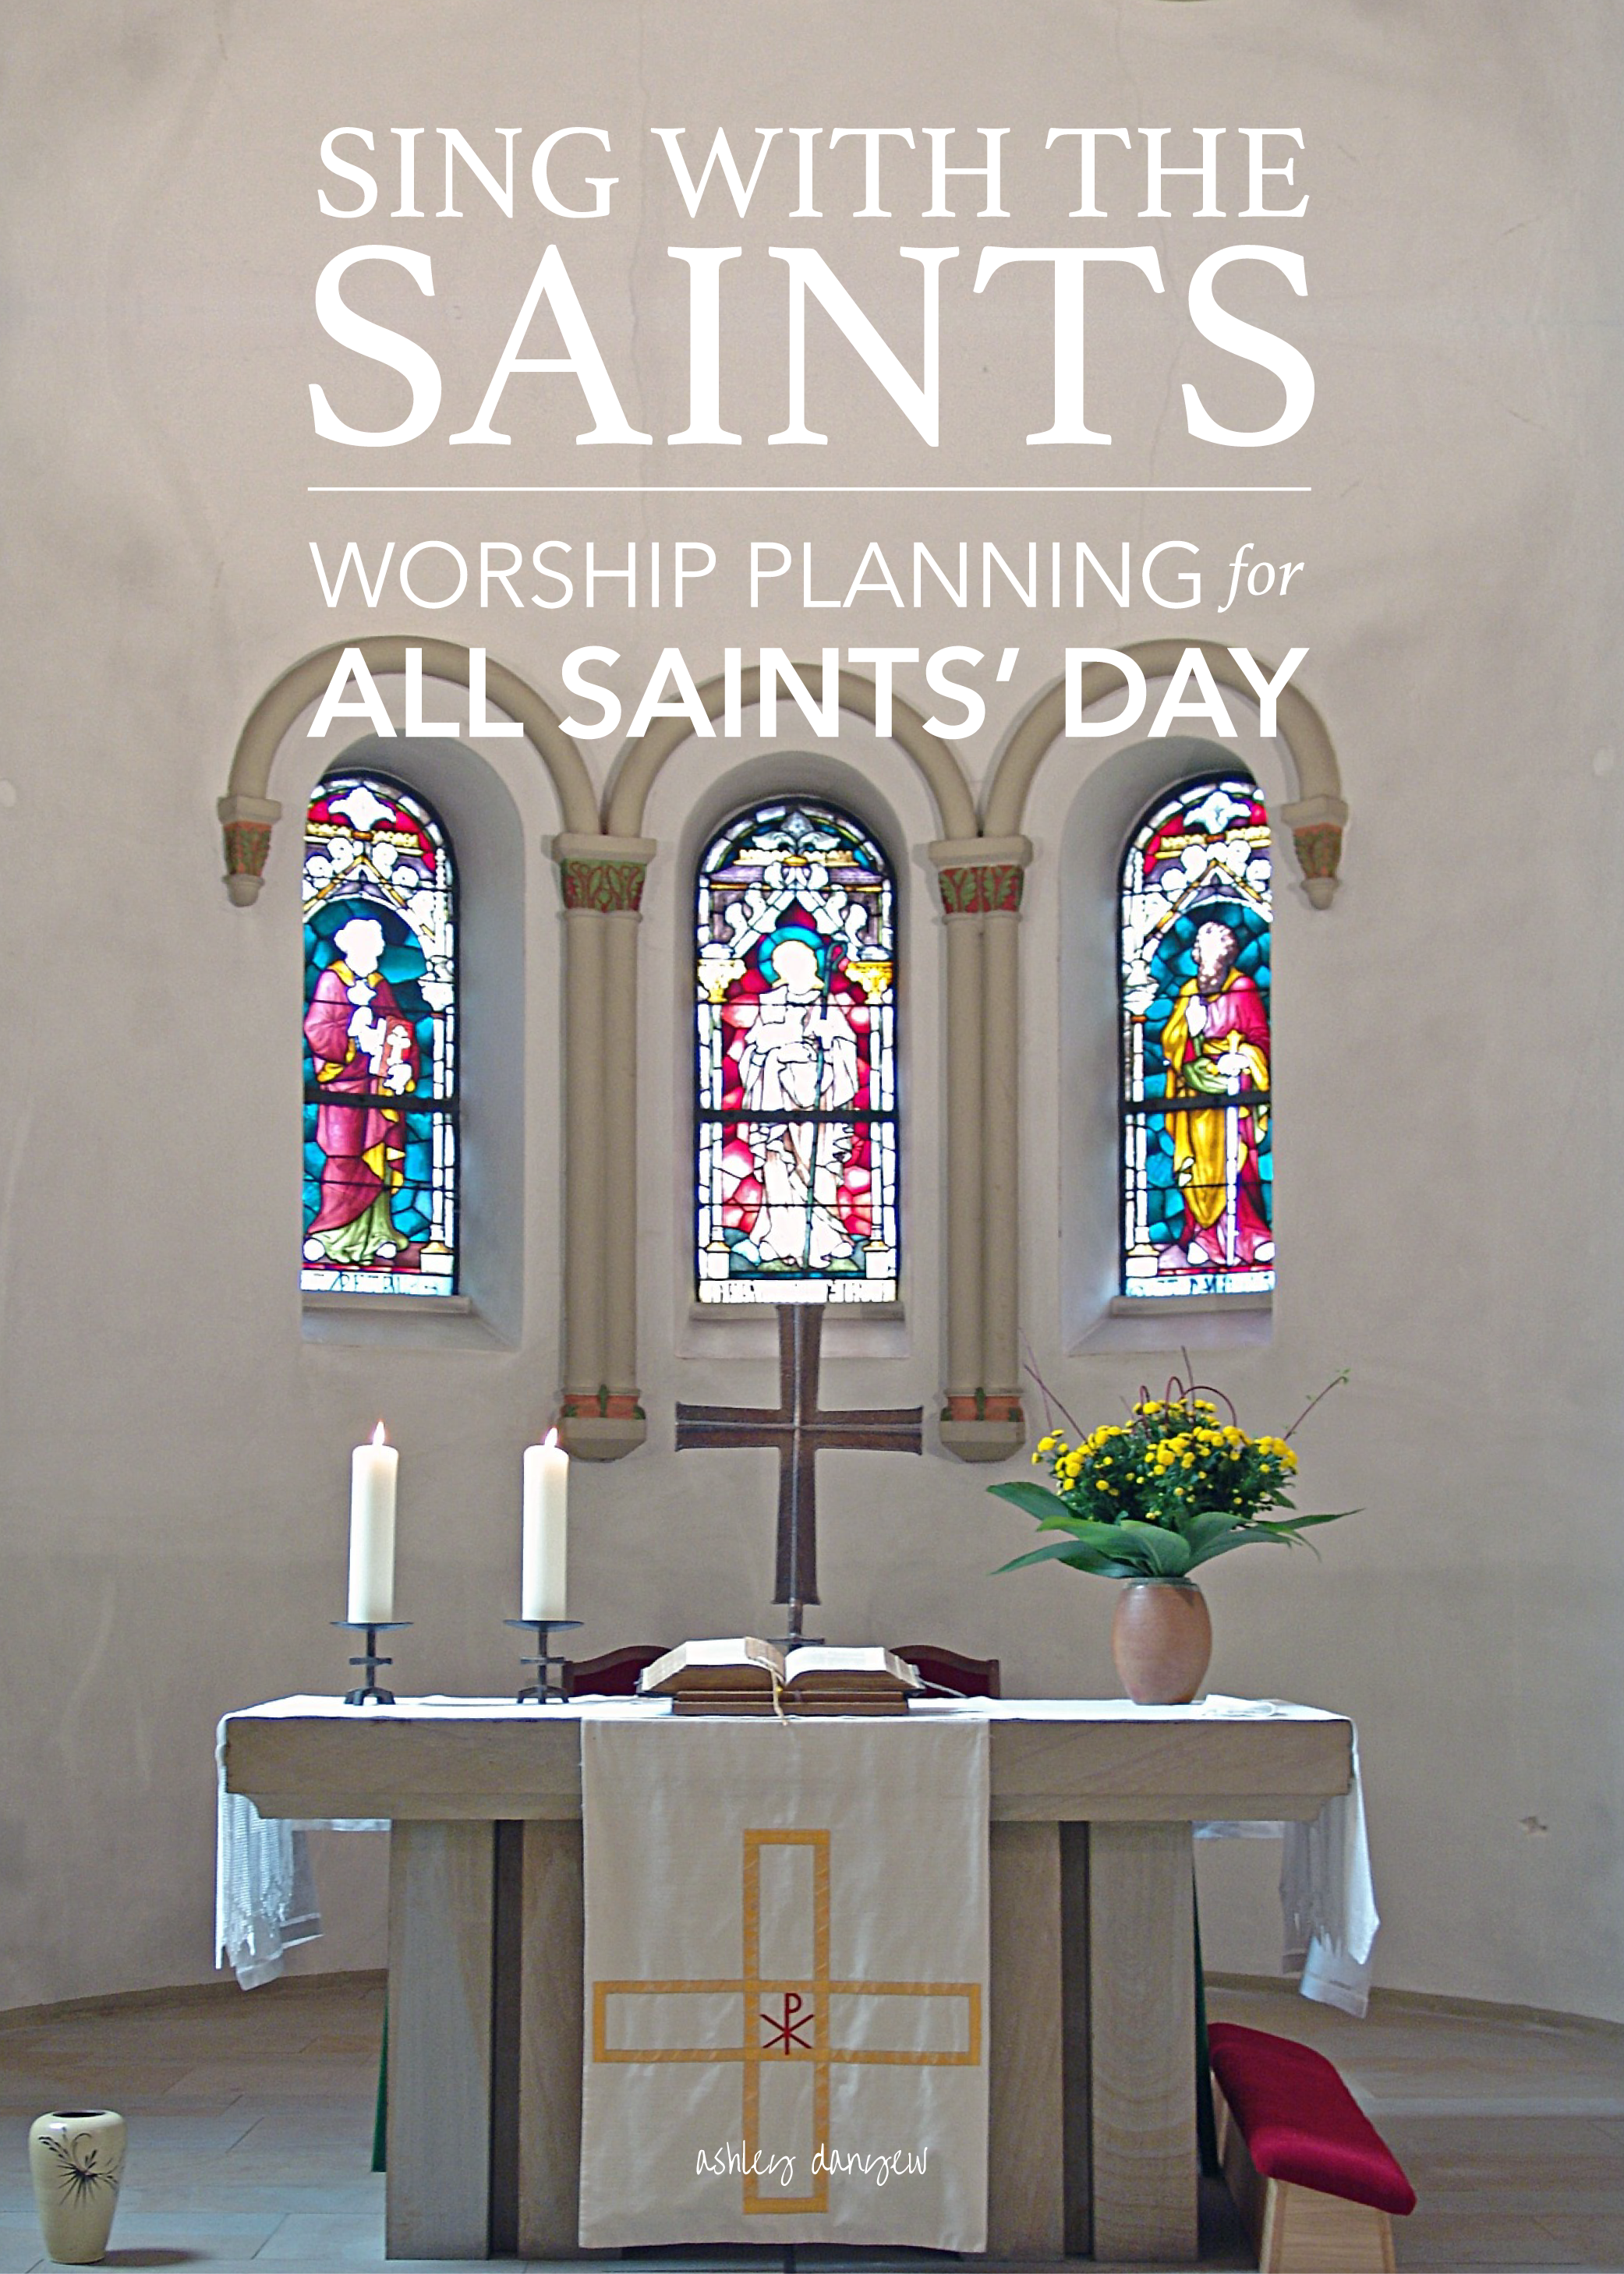 Copy of Sing with the Saints: Worship Planning for All Saints' Day